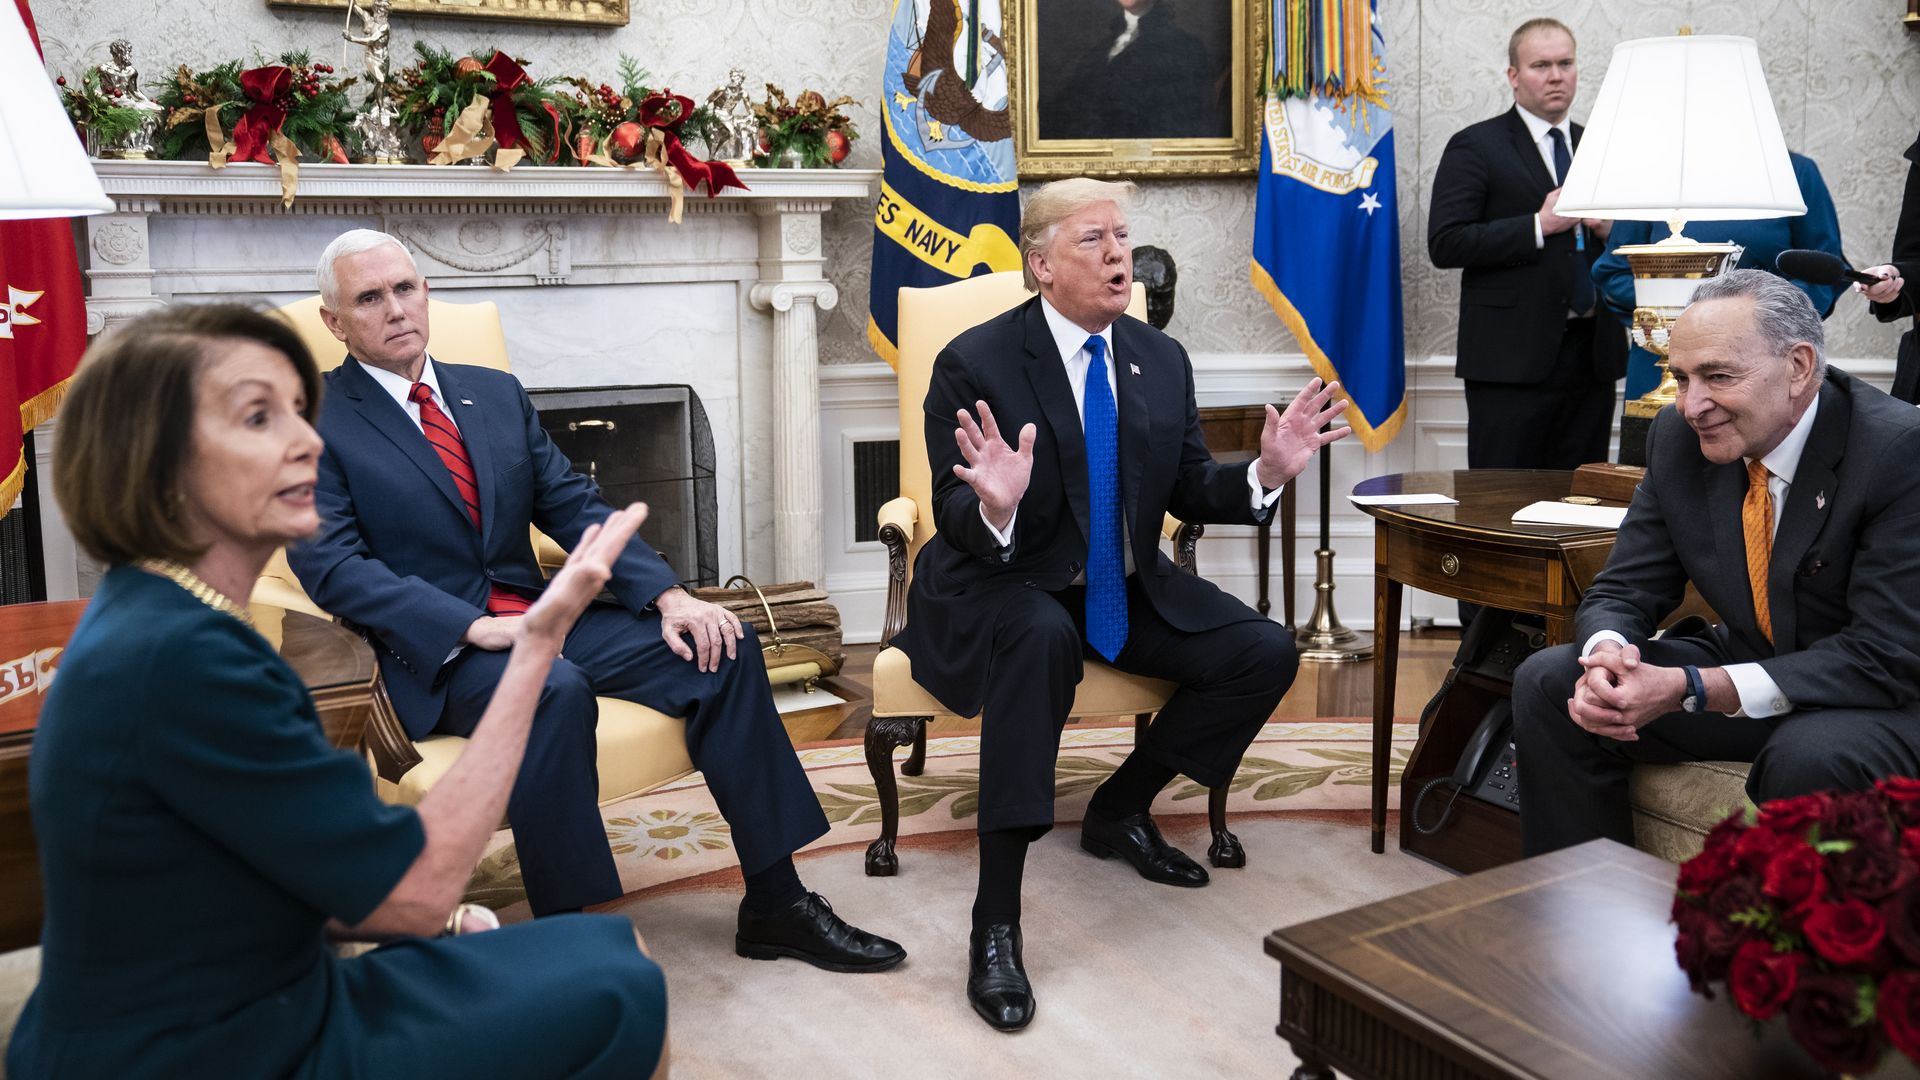 Trump in oval office meeting with Nancy Pelosi and Chuck Schumer.